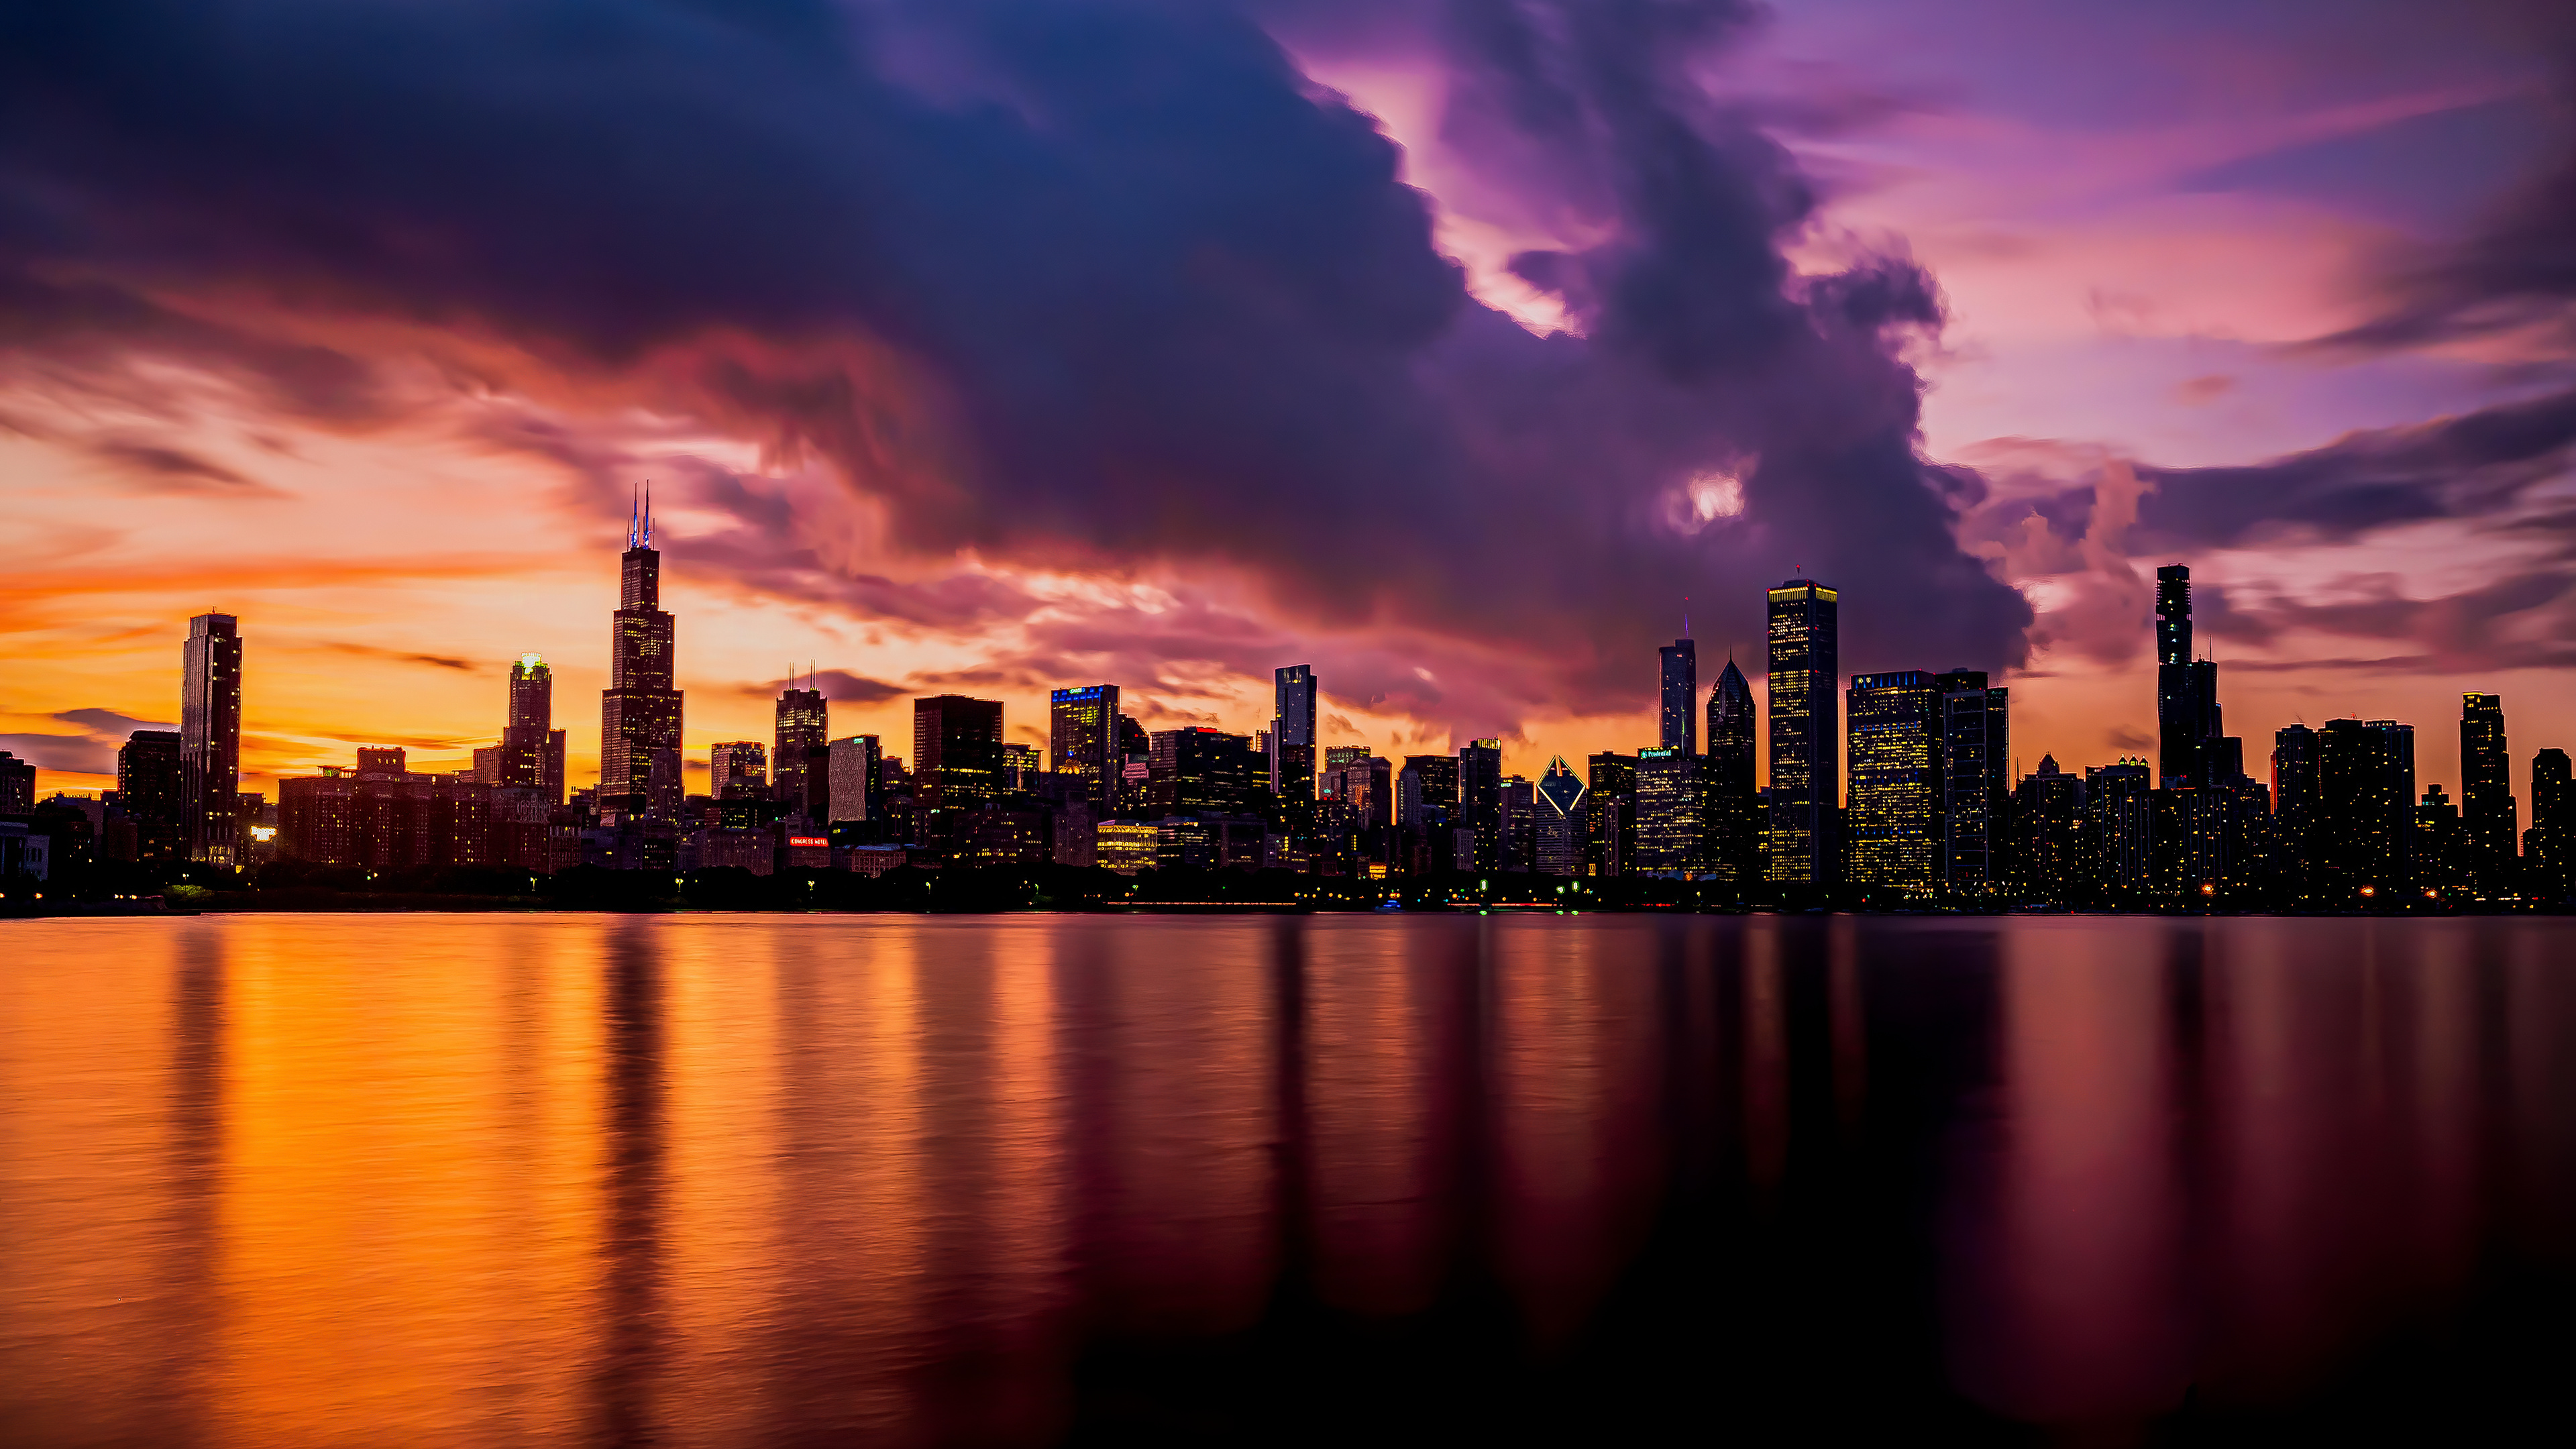 Chicago: The most populous city in the U.S. Midwest, Skyline. 3840x2160 4K Wallpaper.